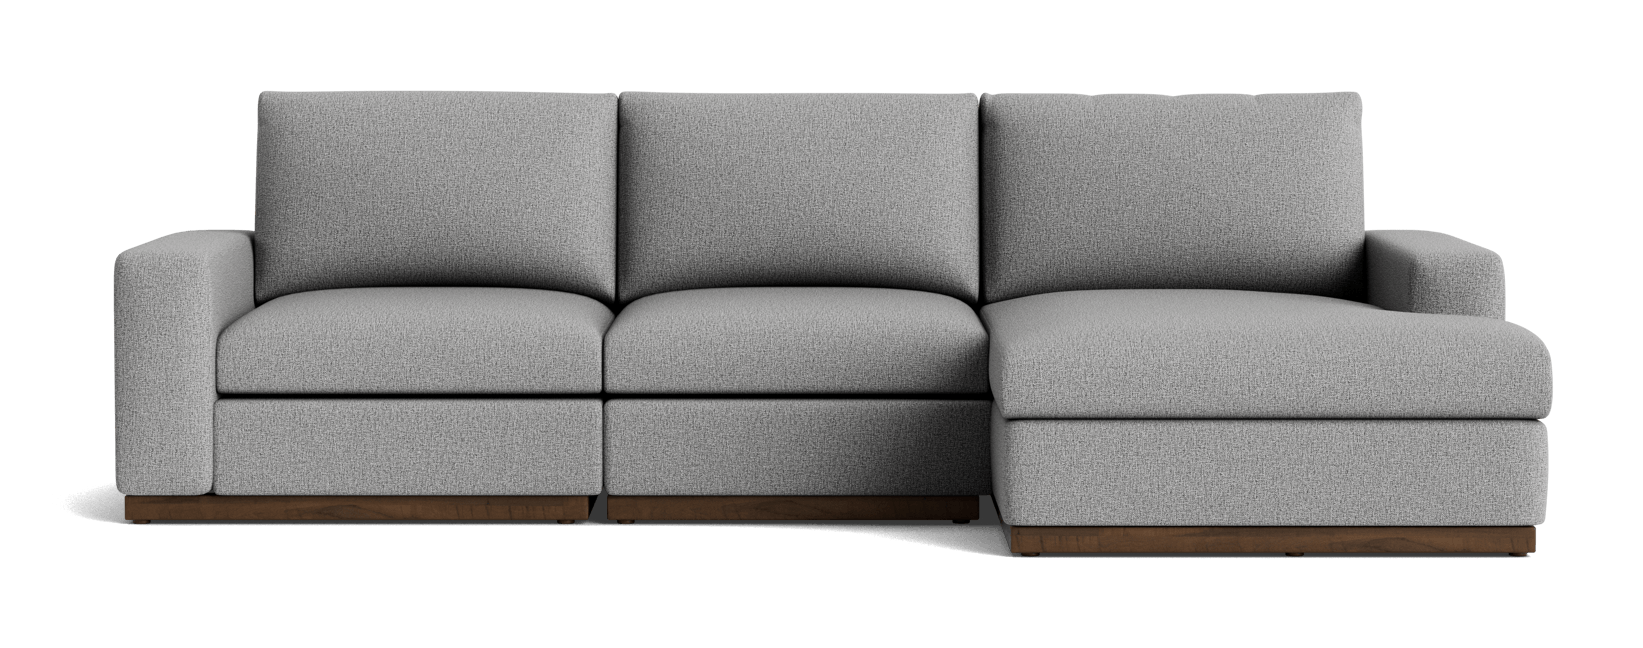 holt sectional with storage taylor felt gray